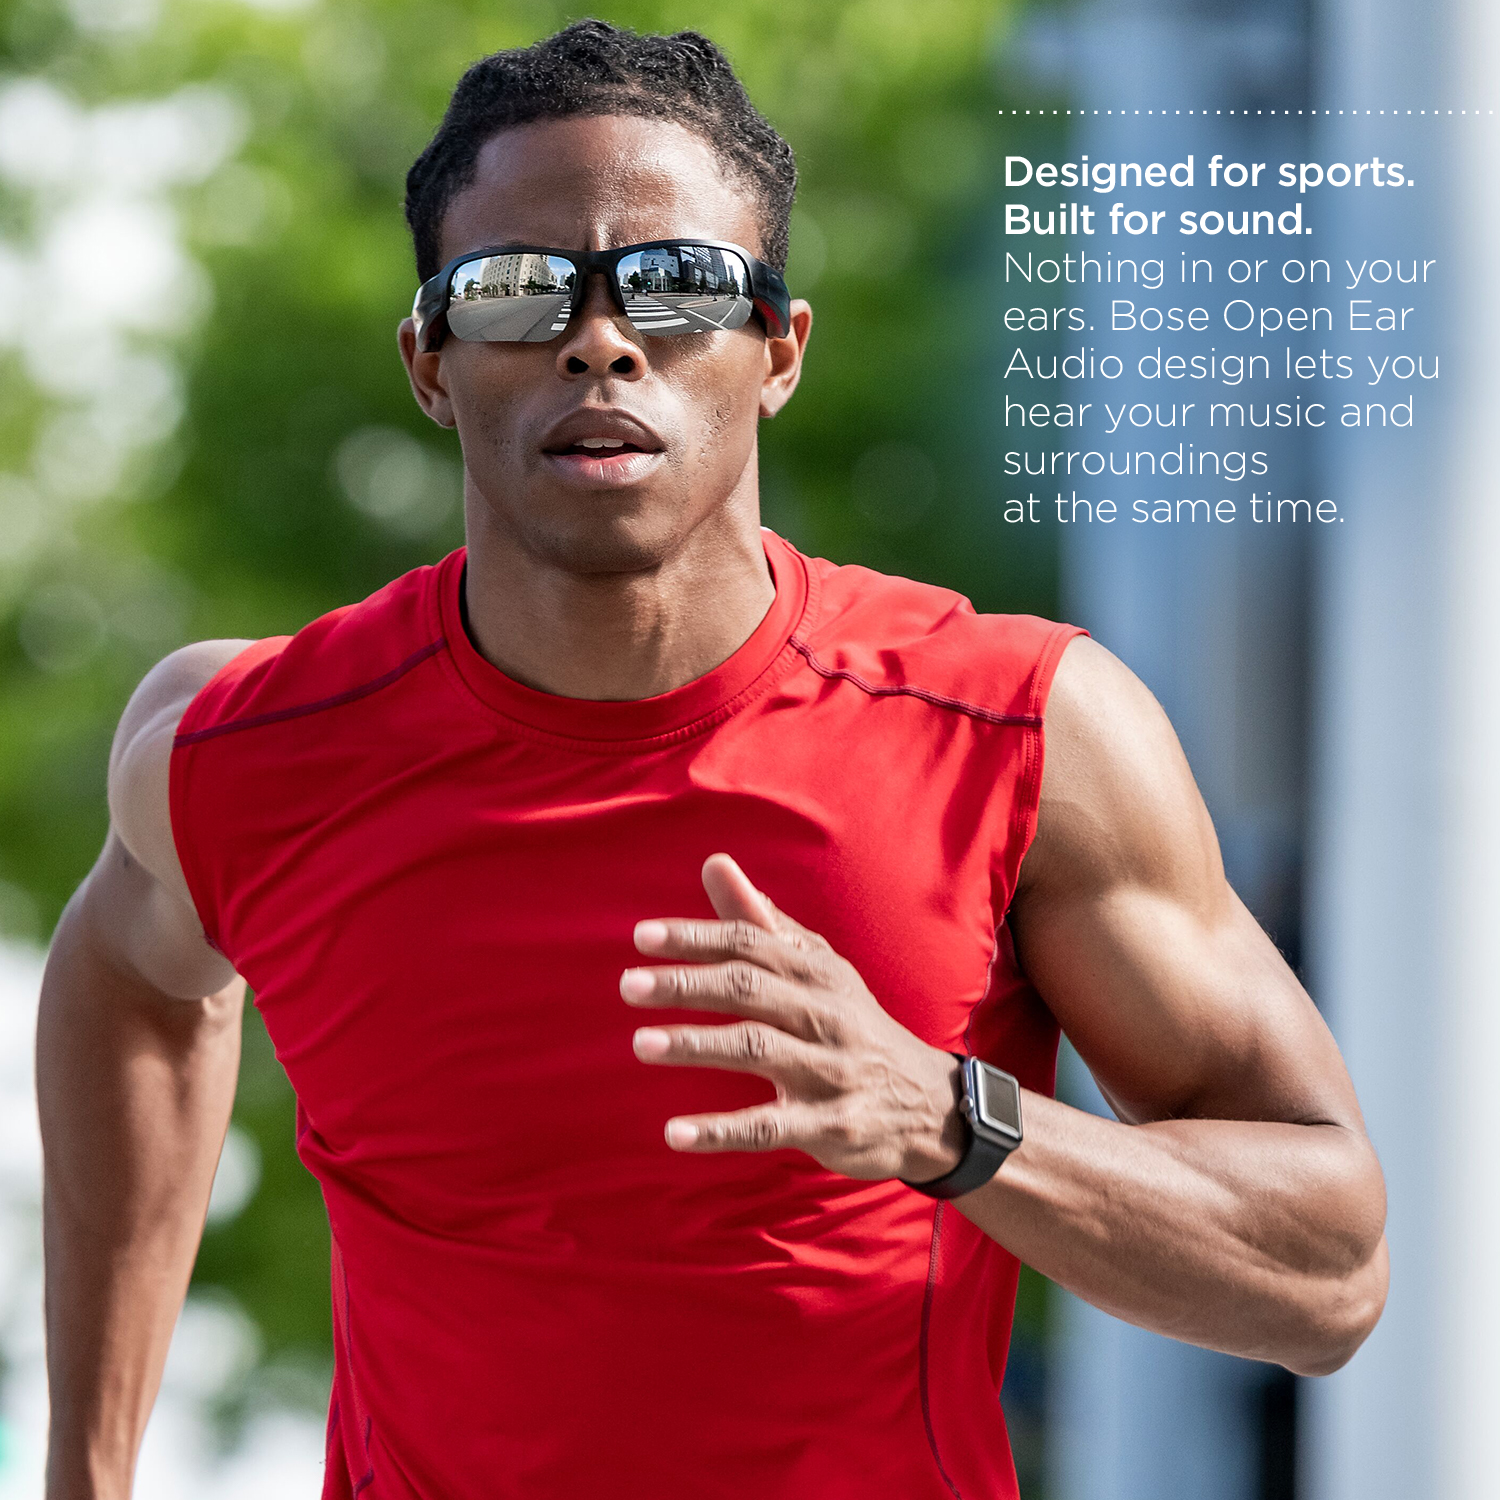 Bose Frames Tempo Bluetooth Sports Sunglasses with Polarized Lenses, Black - image 2 of 12